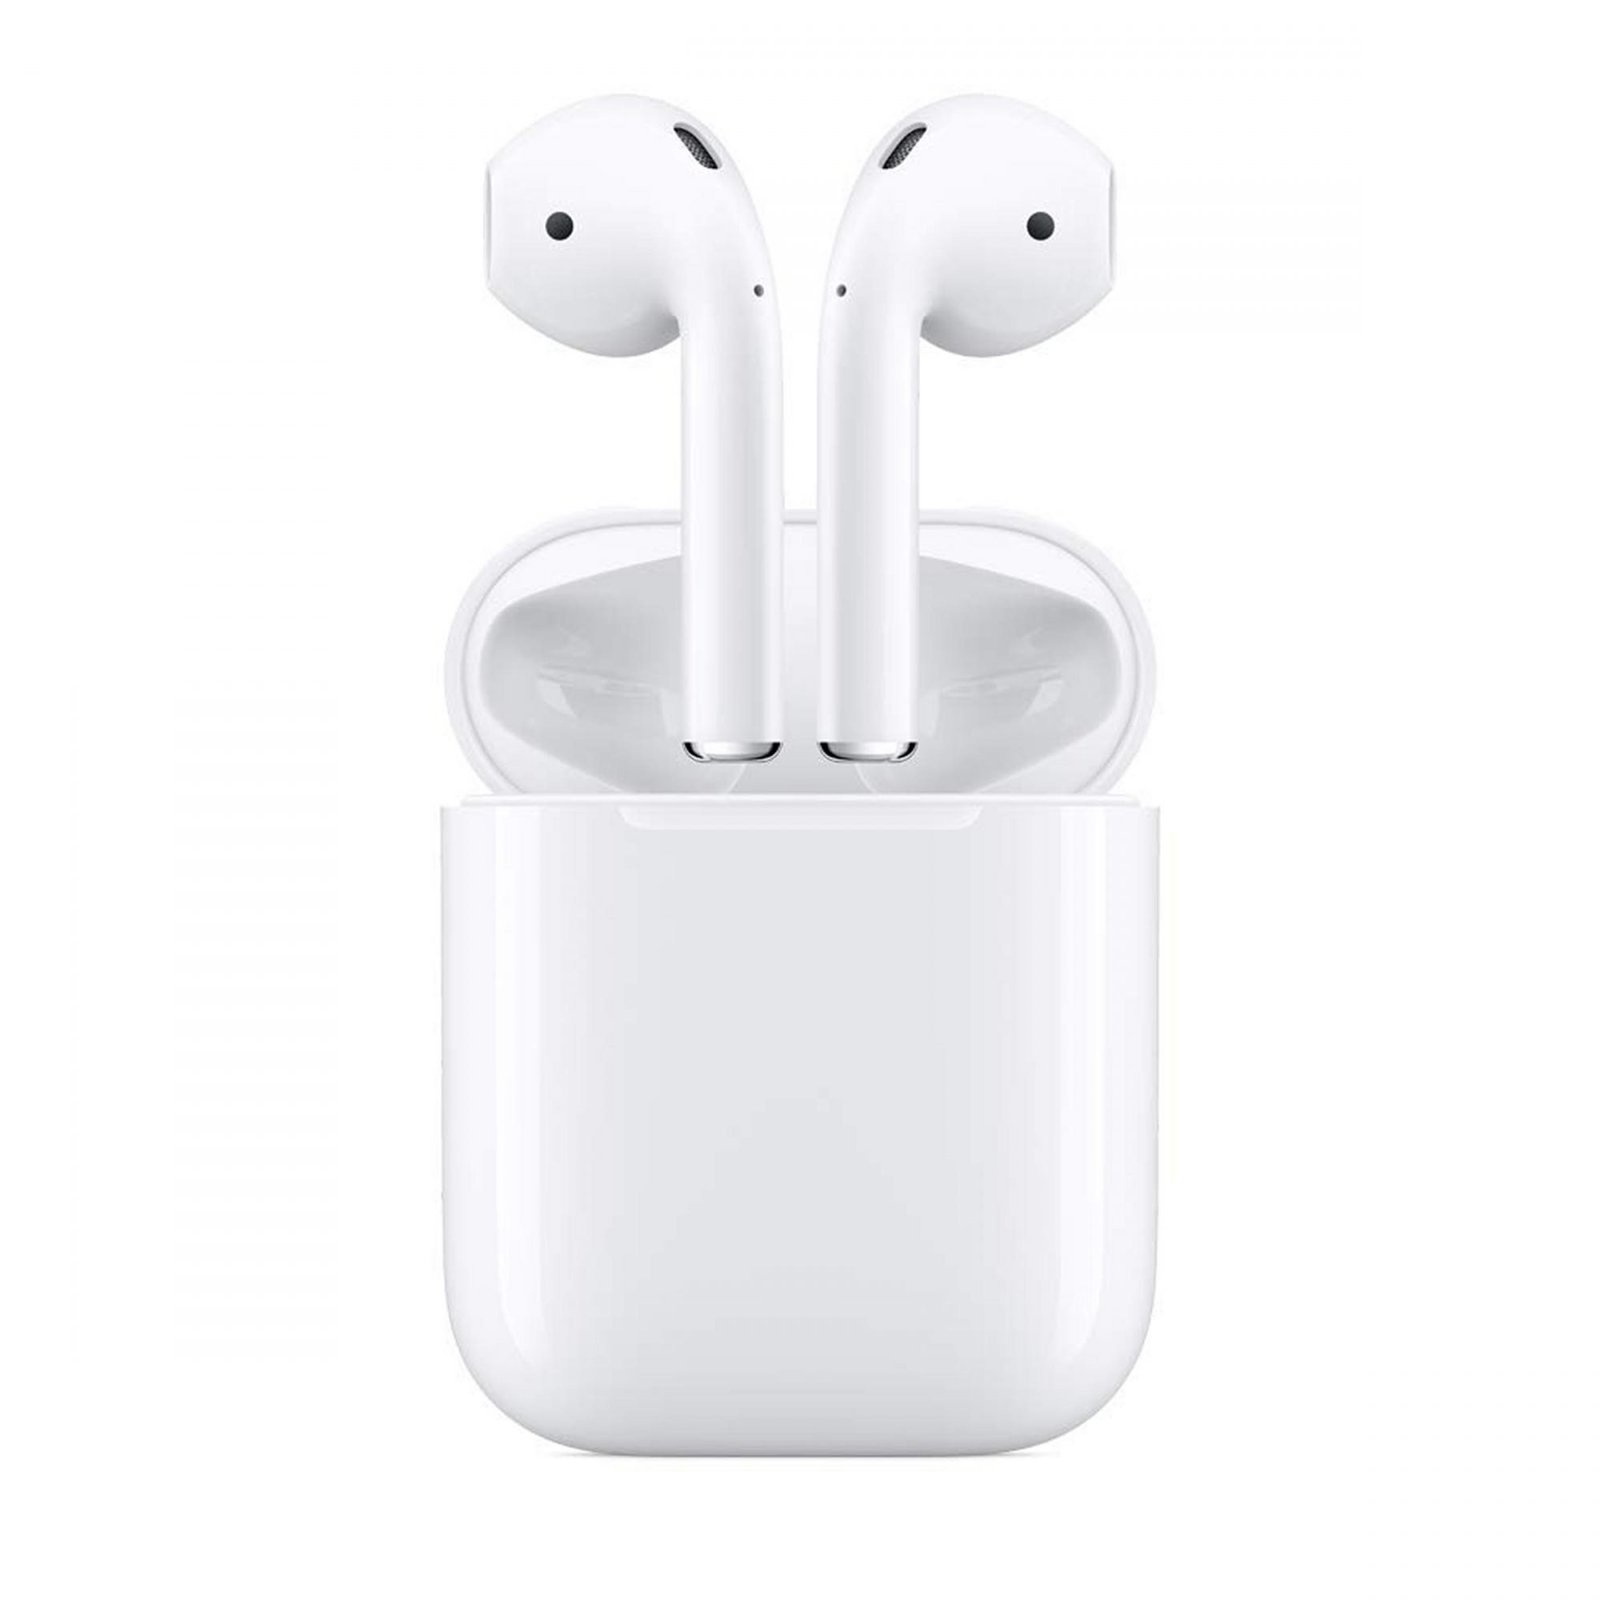 Apple Airpods 2nd Gen with Wireless Charging Case